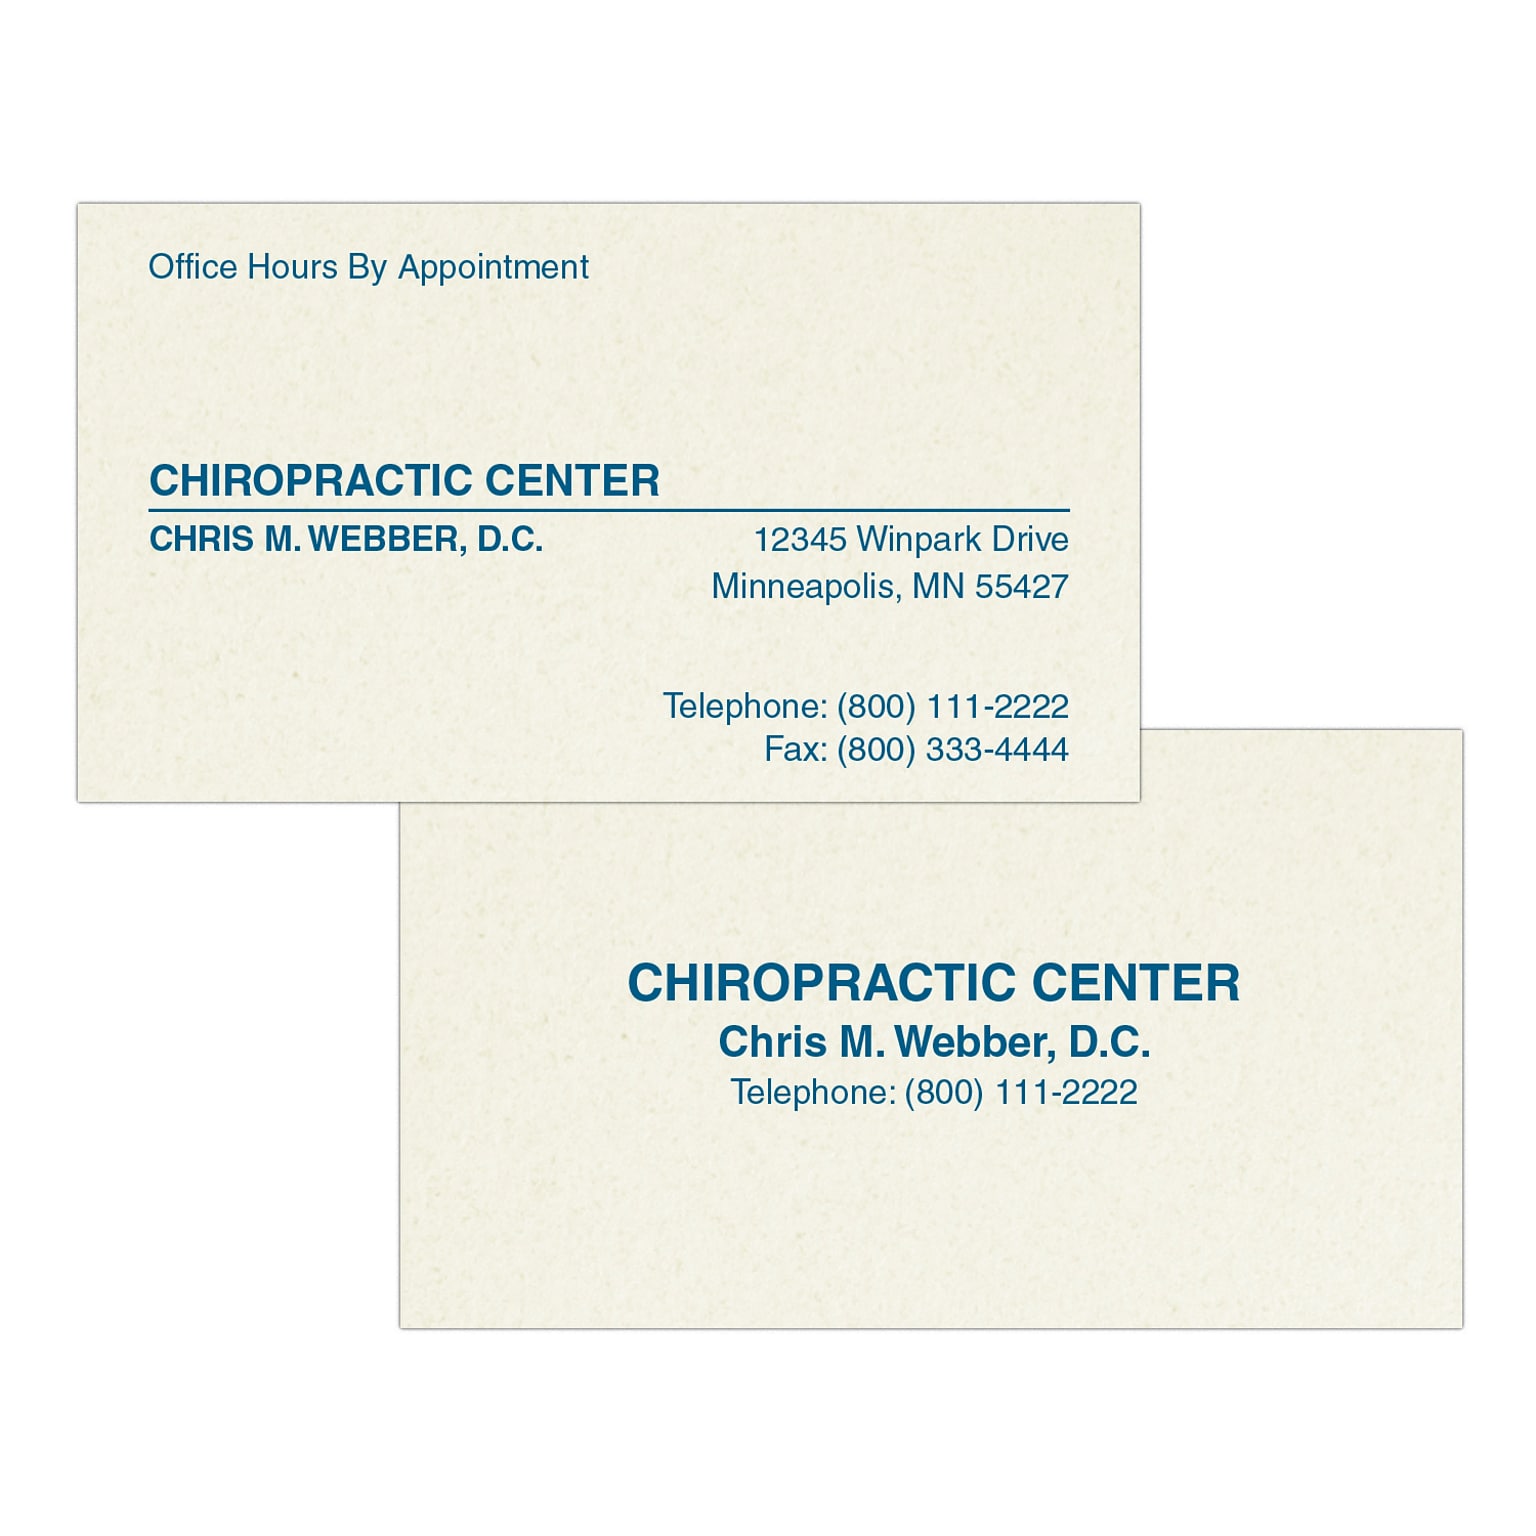 Custom 1-2 Color Appointment Cards, CLASSIC CREST® Smooth Millstone 80#, Flat Print, 1 Custom Ink, 2-Sided, 250/Pk